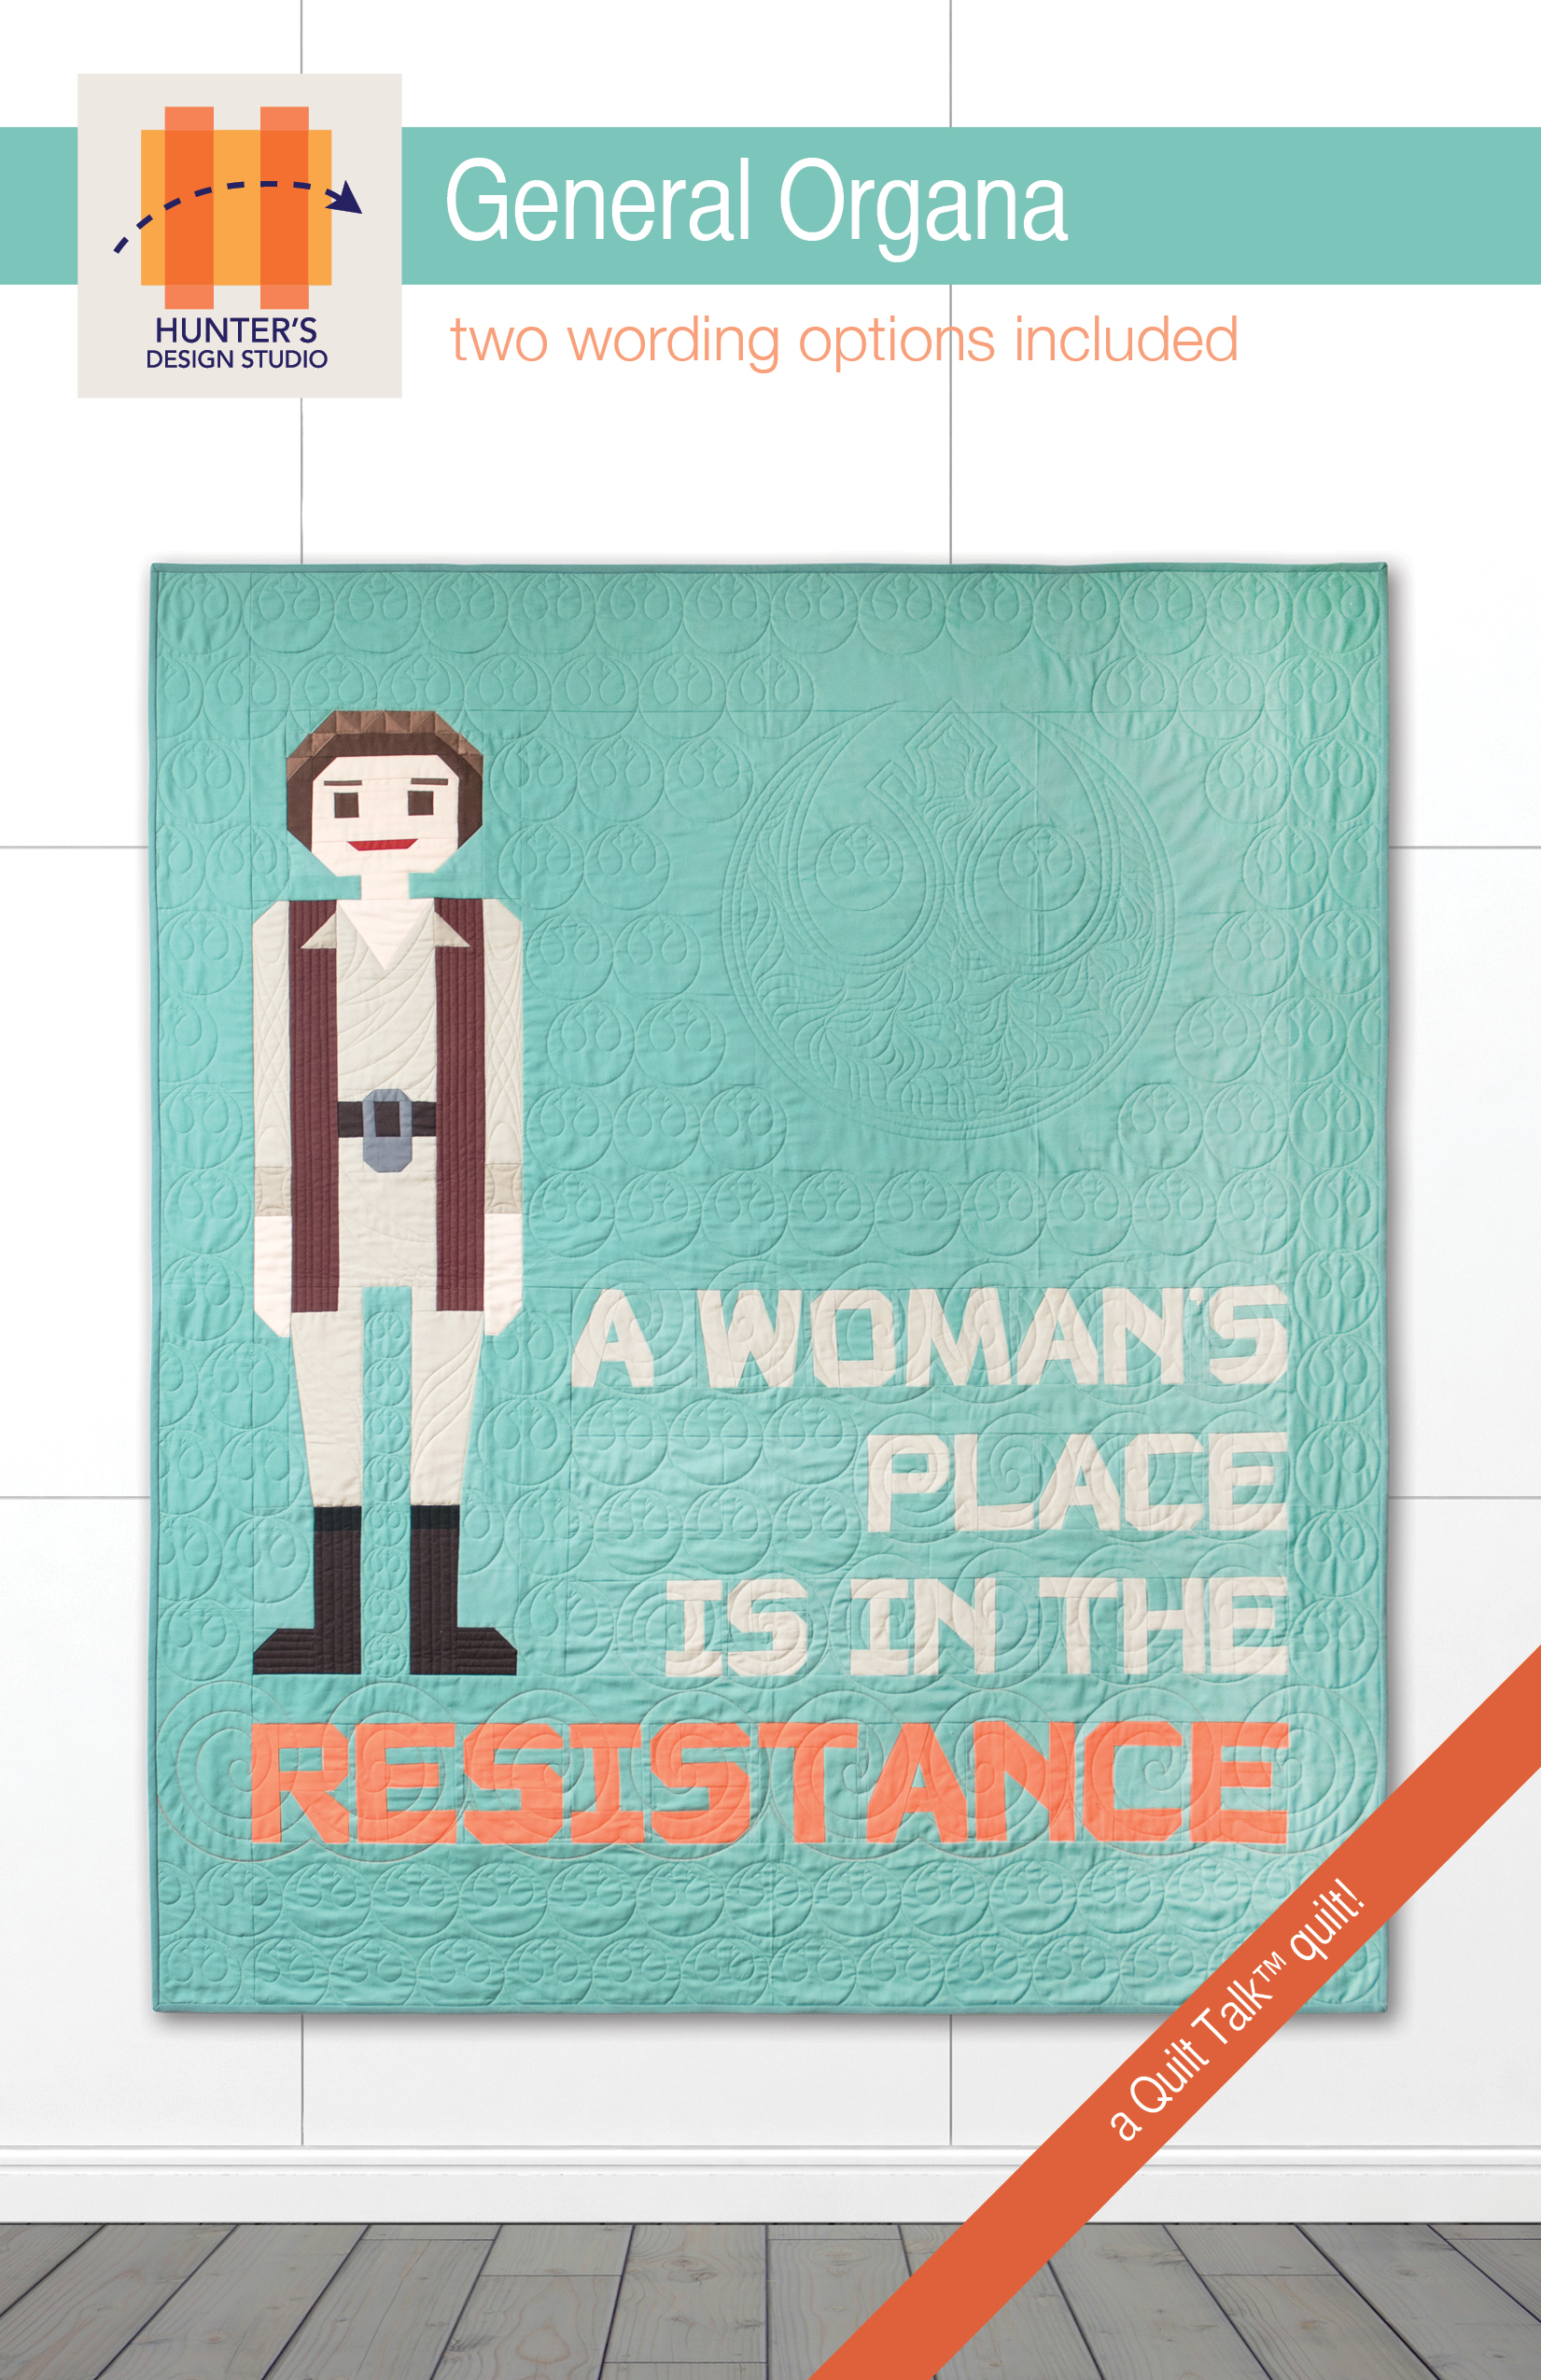 General Organa quilt features a pixelated version of General organa with the words "A woman's place is in the resistance"